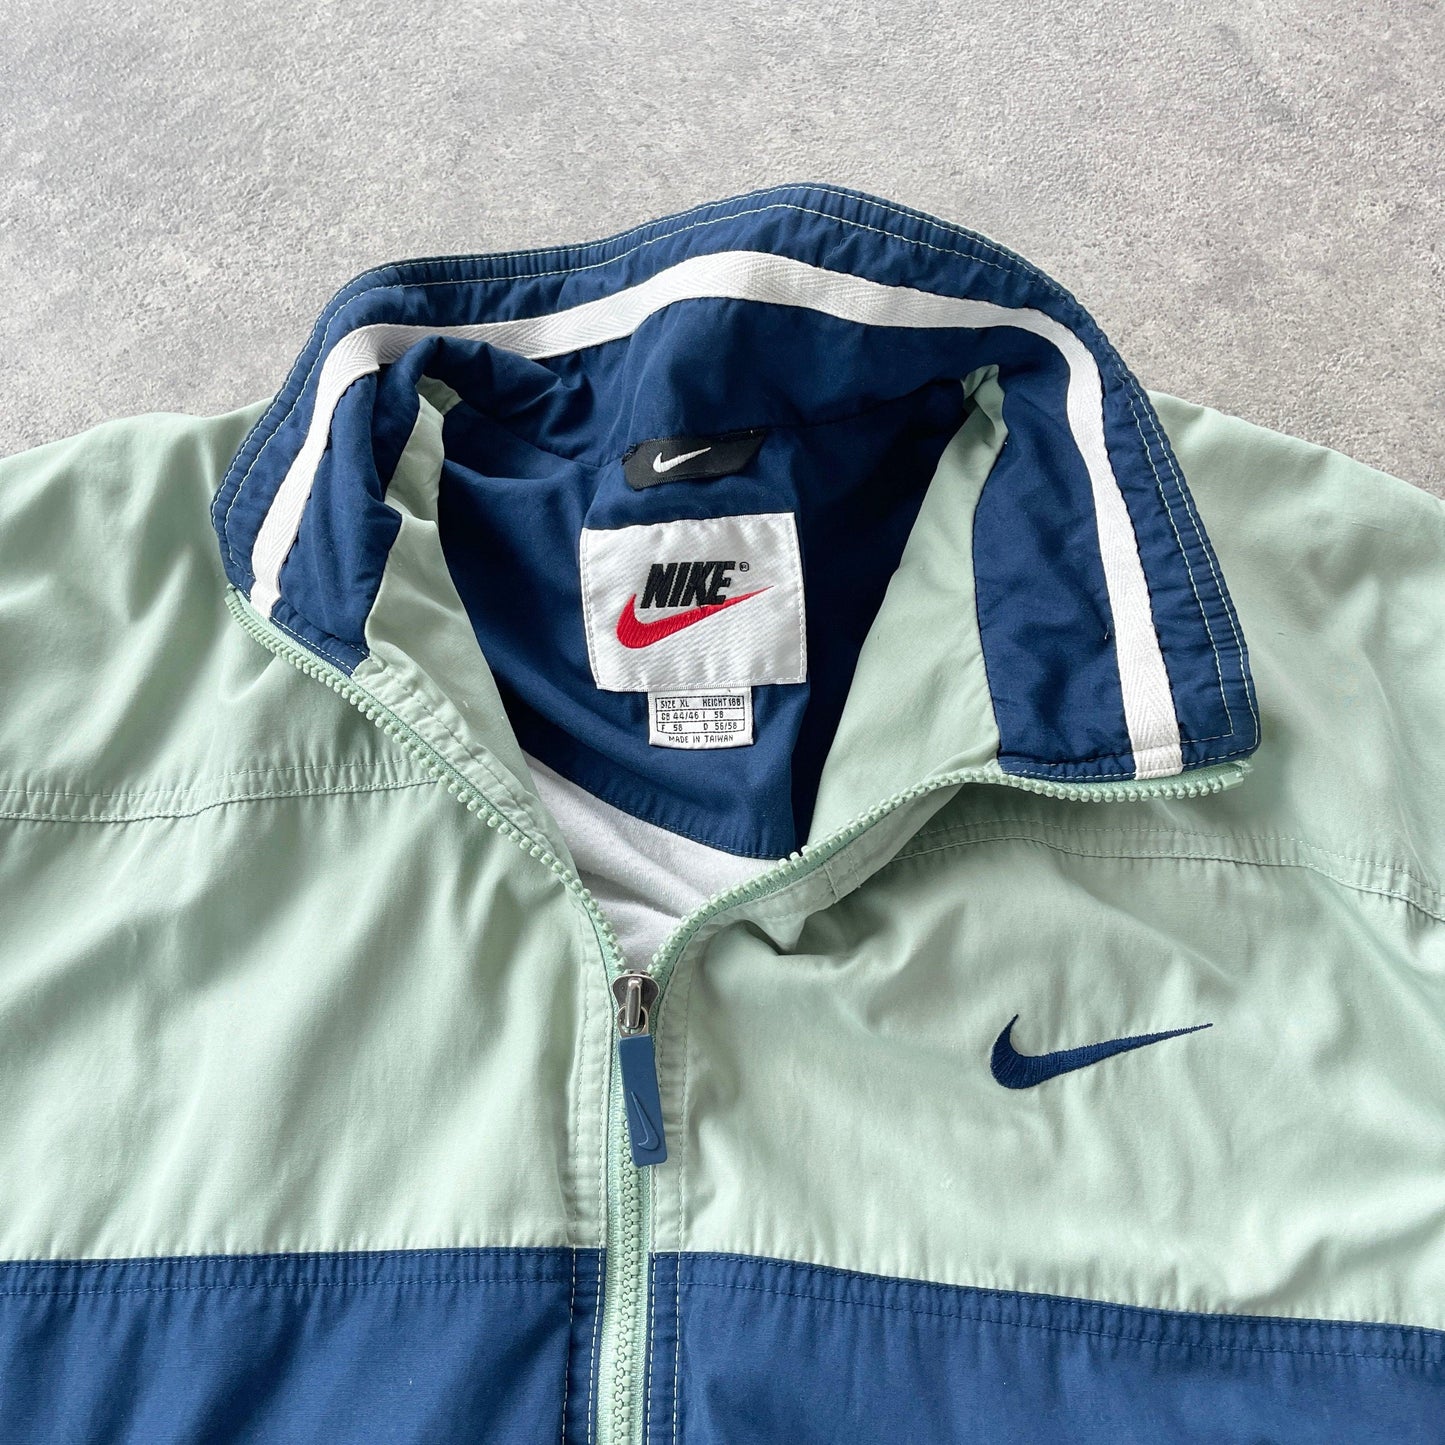 Nike 1990s lightweight embroidered track jacket (XL) - Known Source